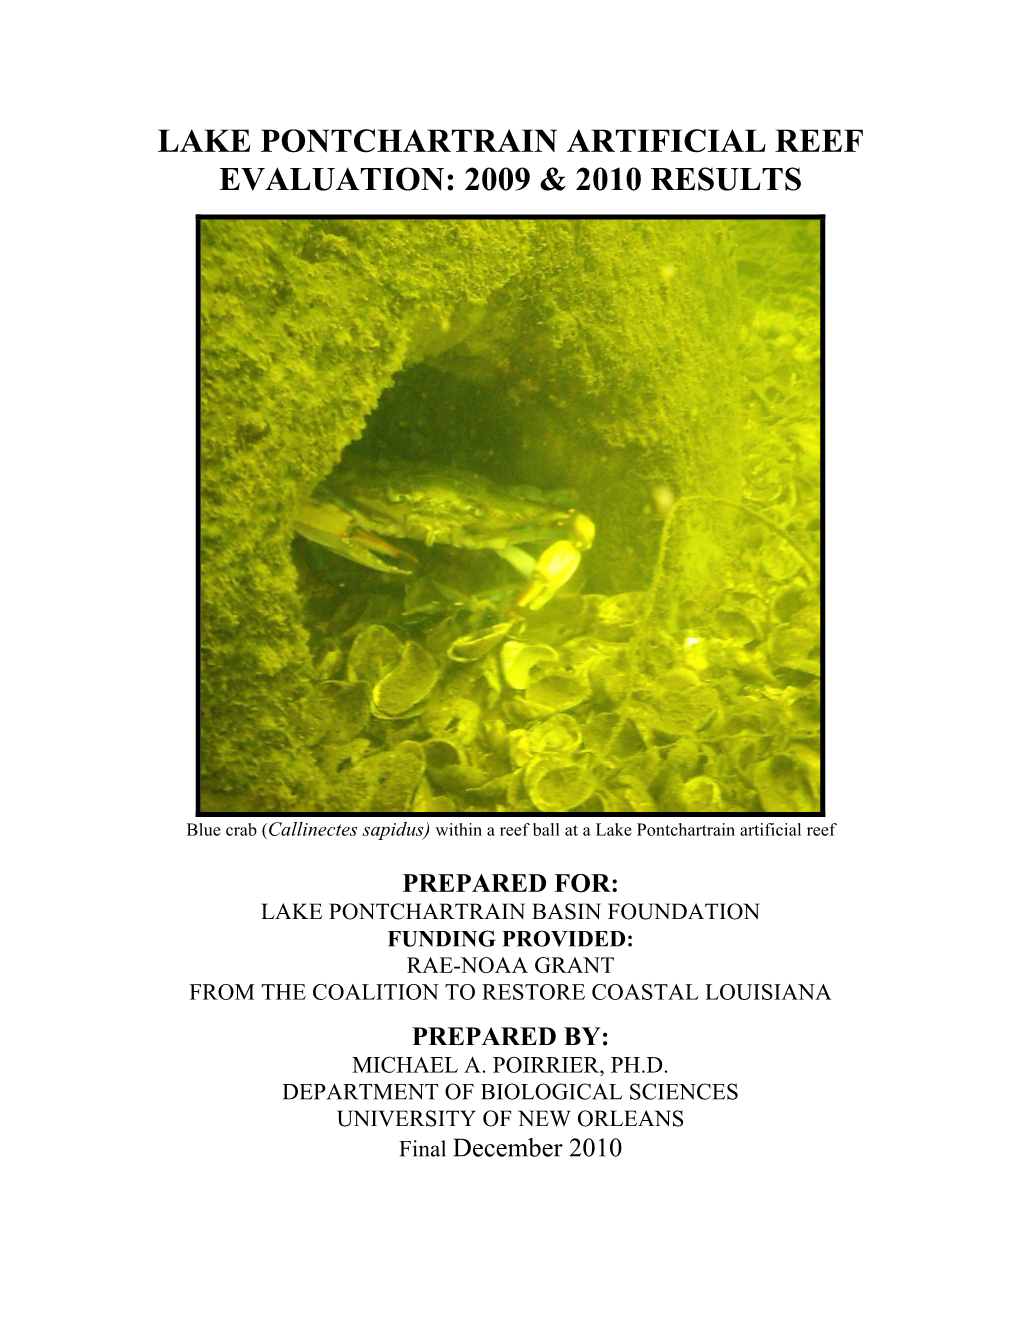 Lake Pontchartrain Artificial Reef Evaluation: 2009 & 2010 Results